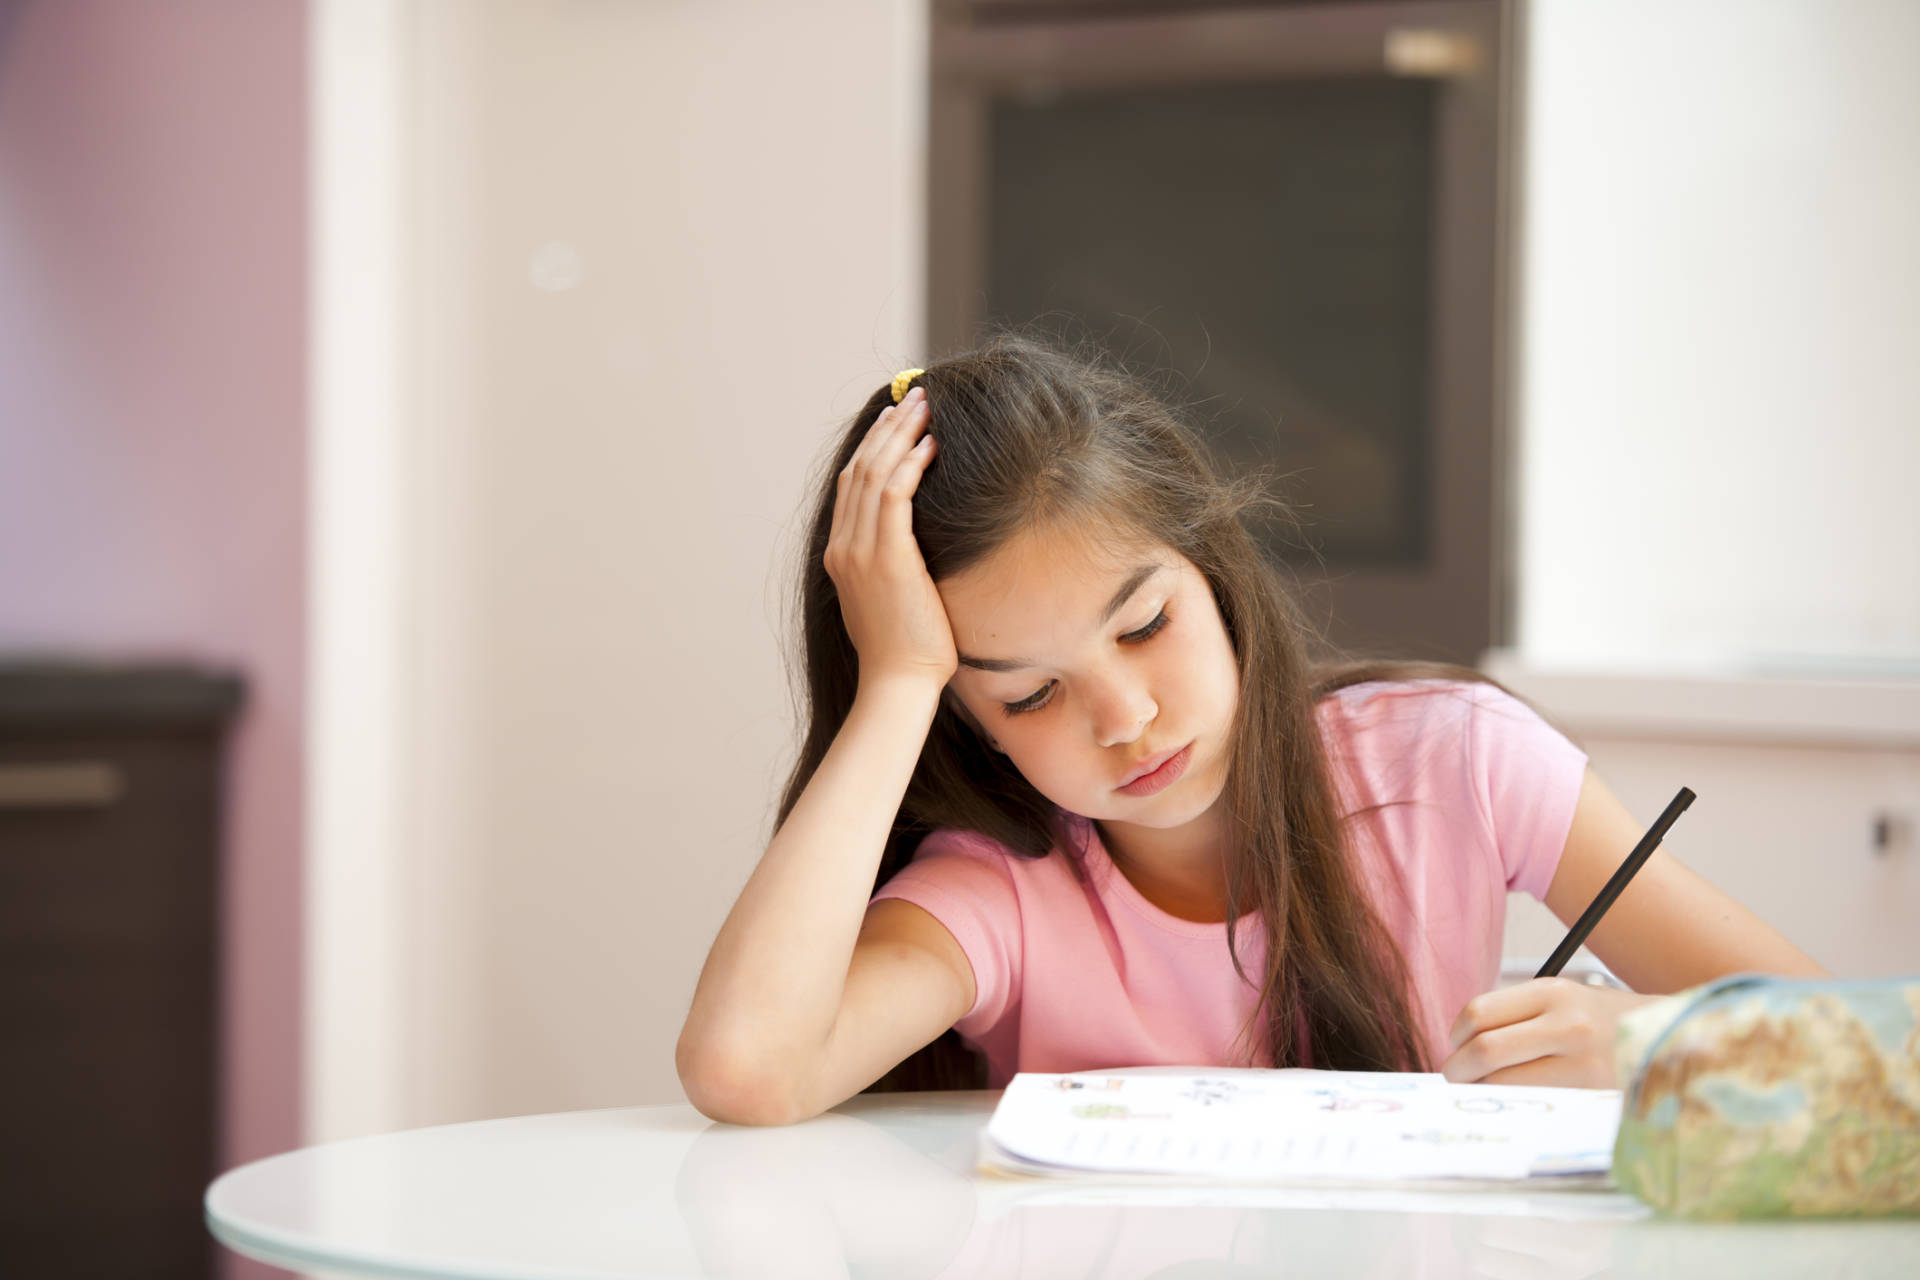 Three Things Overscheduled Kids Need More of in Their Lives